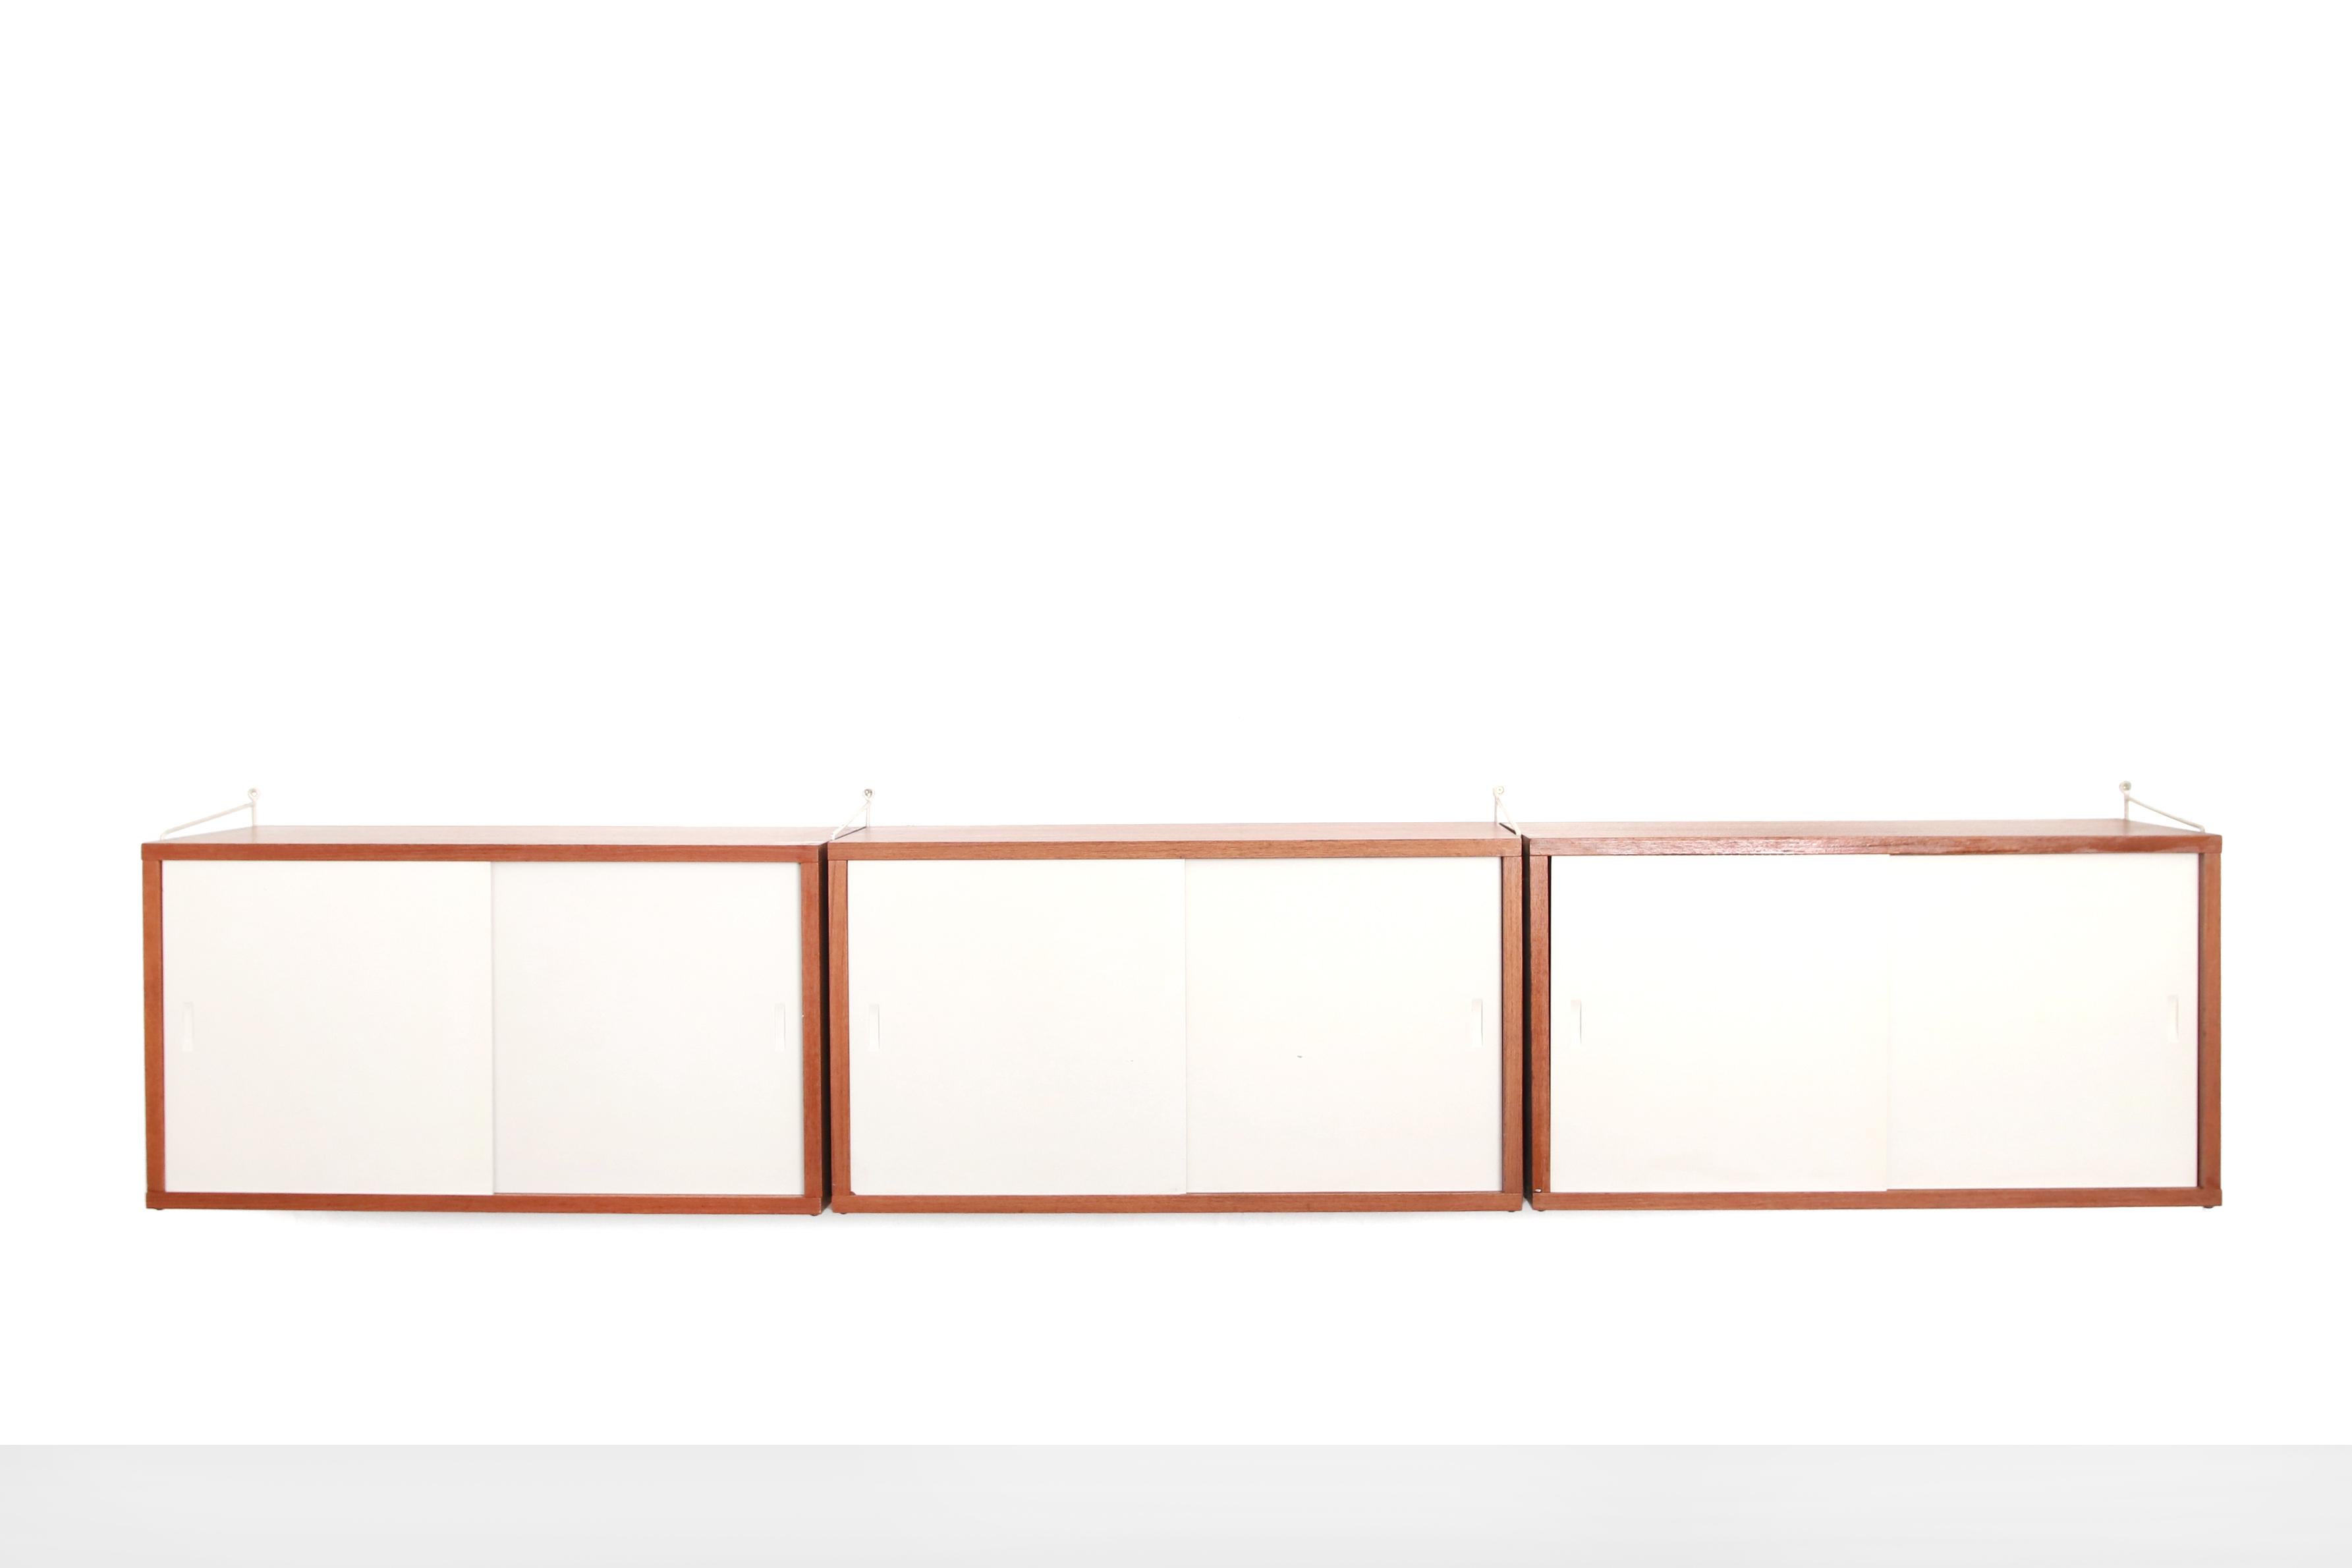 Beautiful string wall rack / sideboard designed by Nisse Strinning. This rack is a real vintage model from the late 1950s-early 1960s. This system consists of 4 white uprights and 3 teak cabinets with white sliding doors. Wonderful to use as a